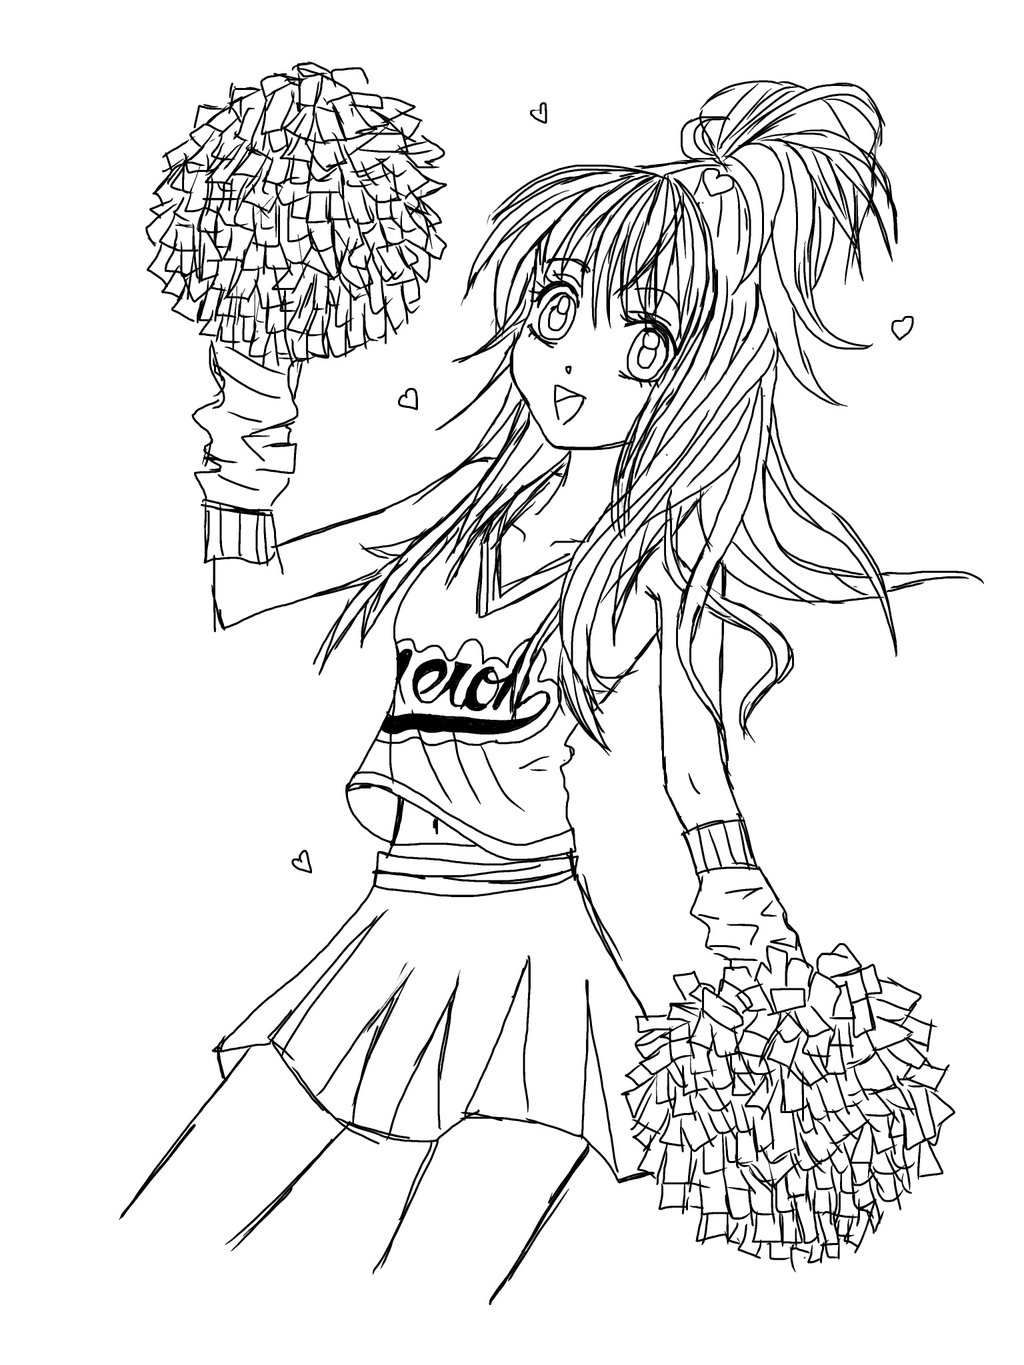 cheer needle coloring pages